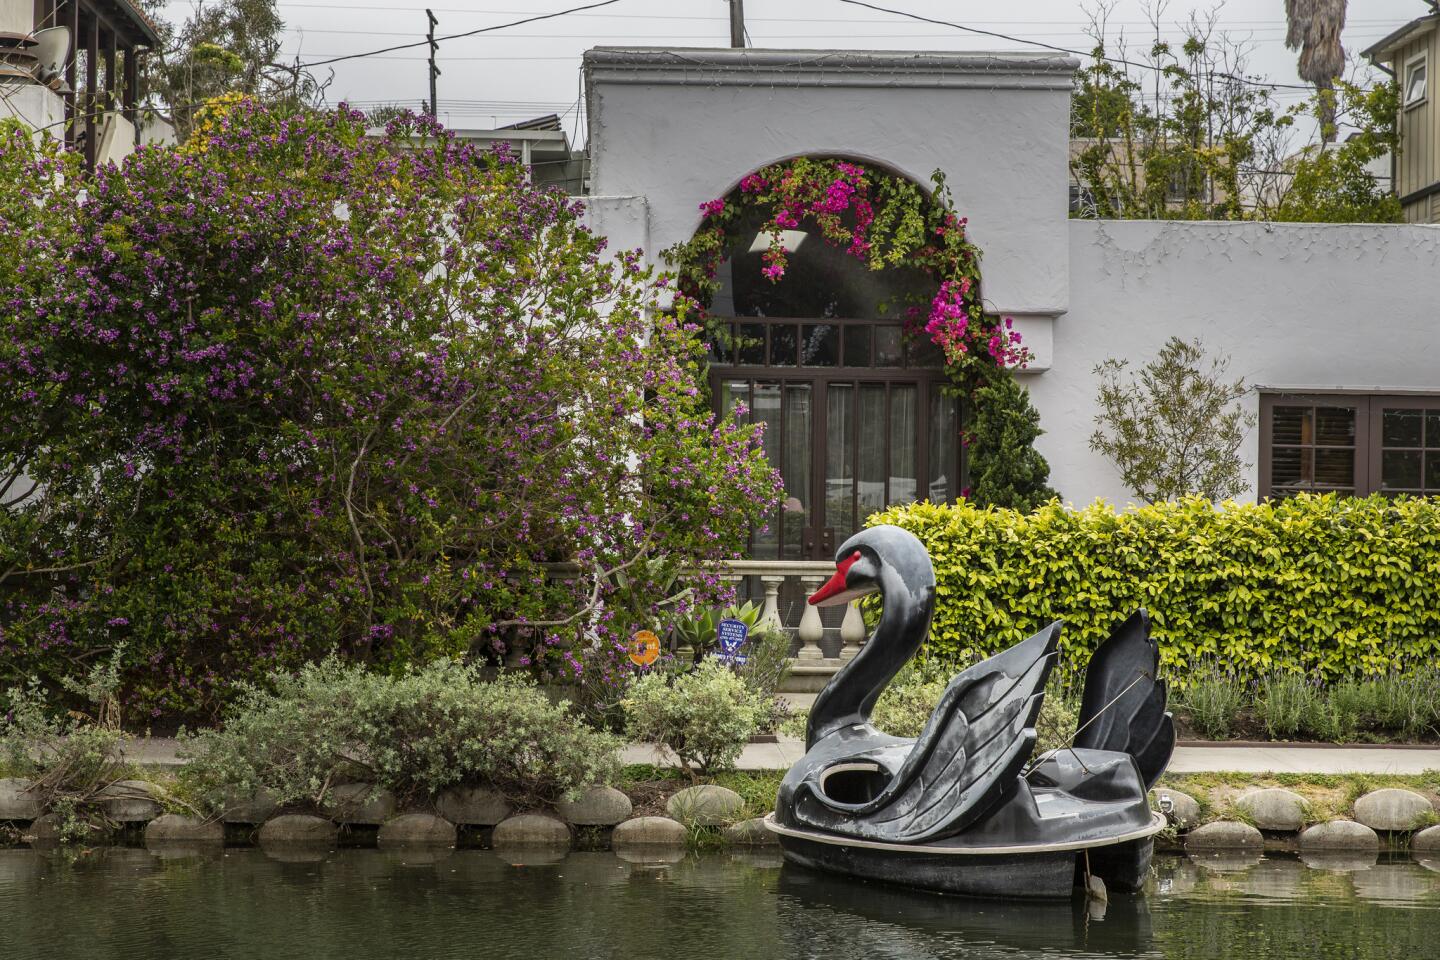 The Venice Canals